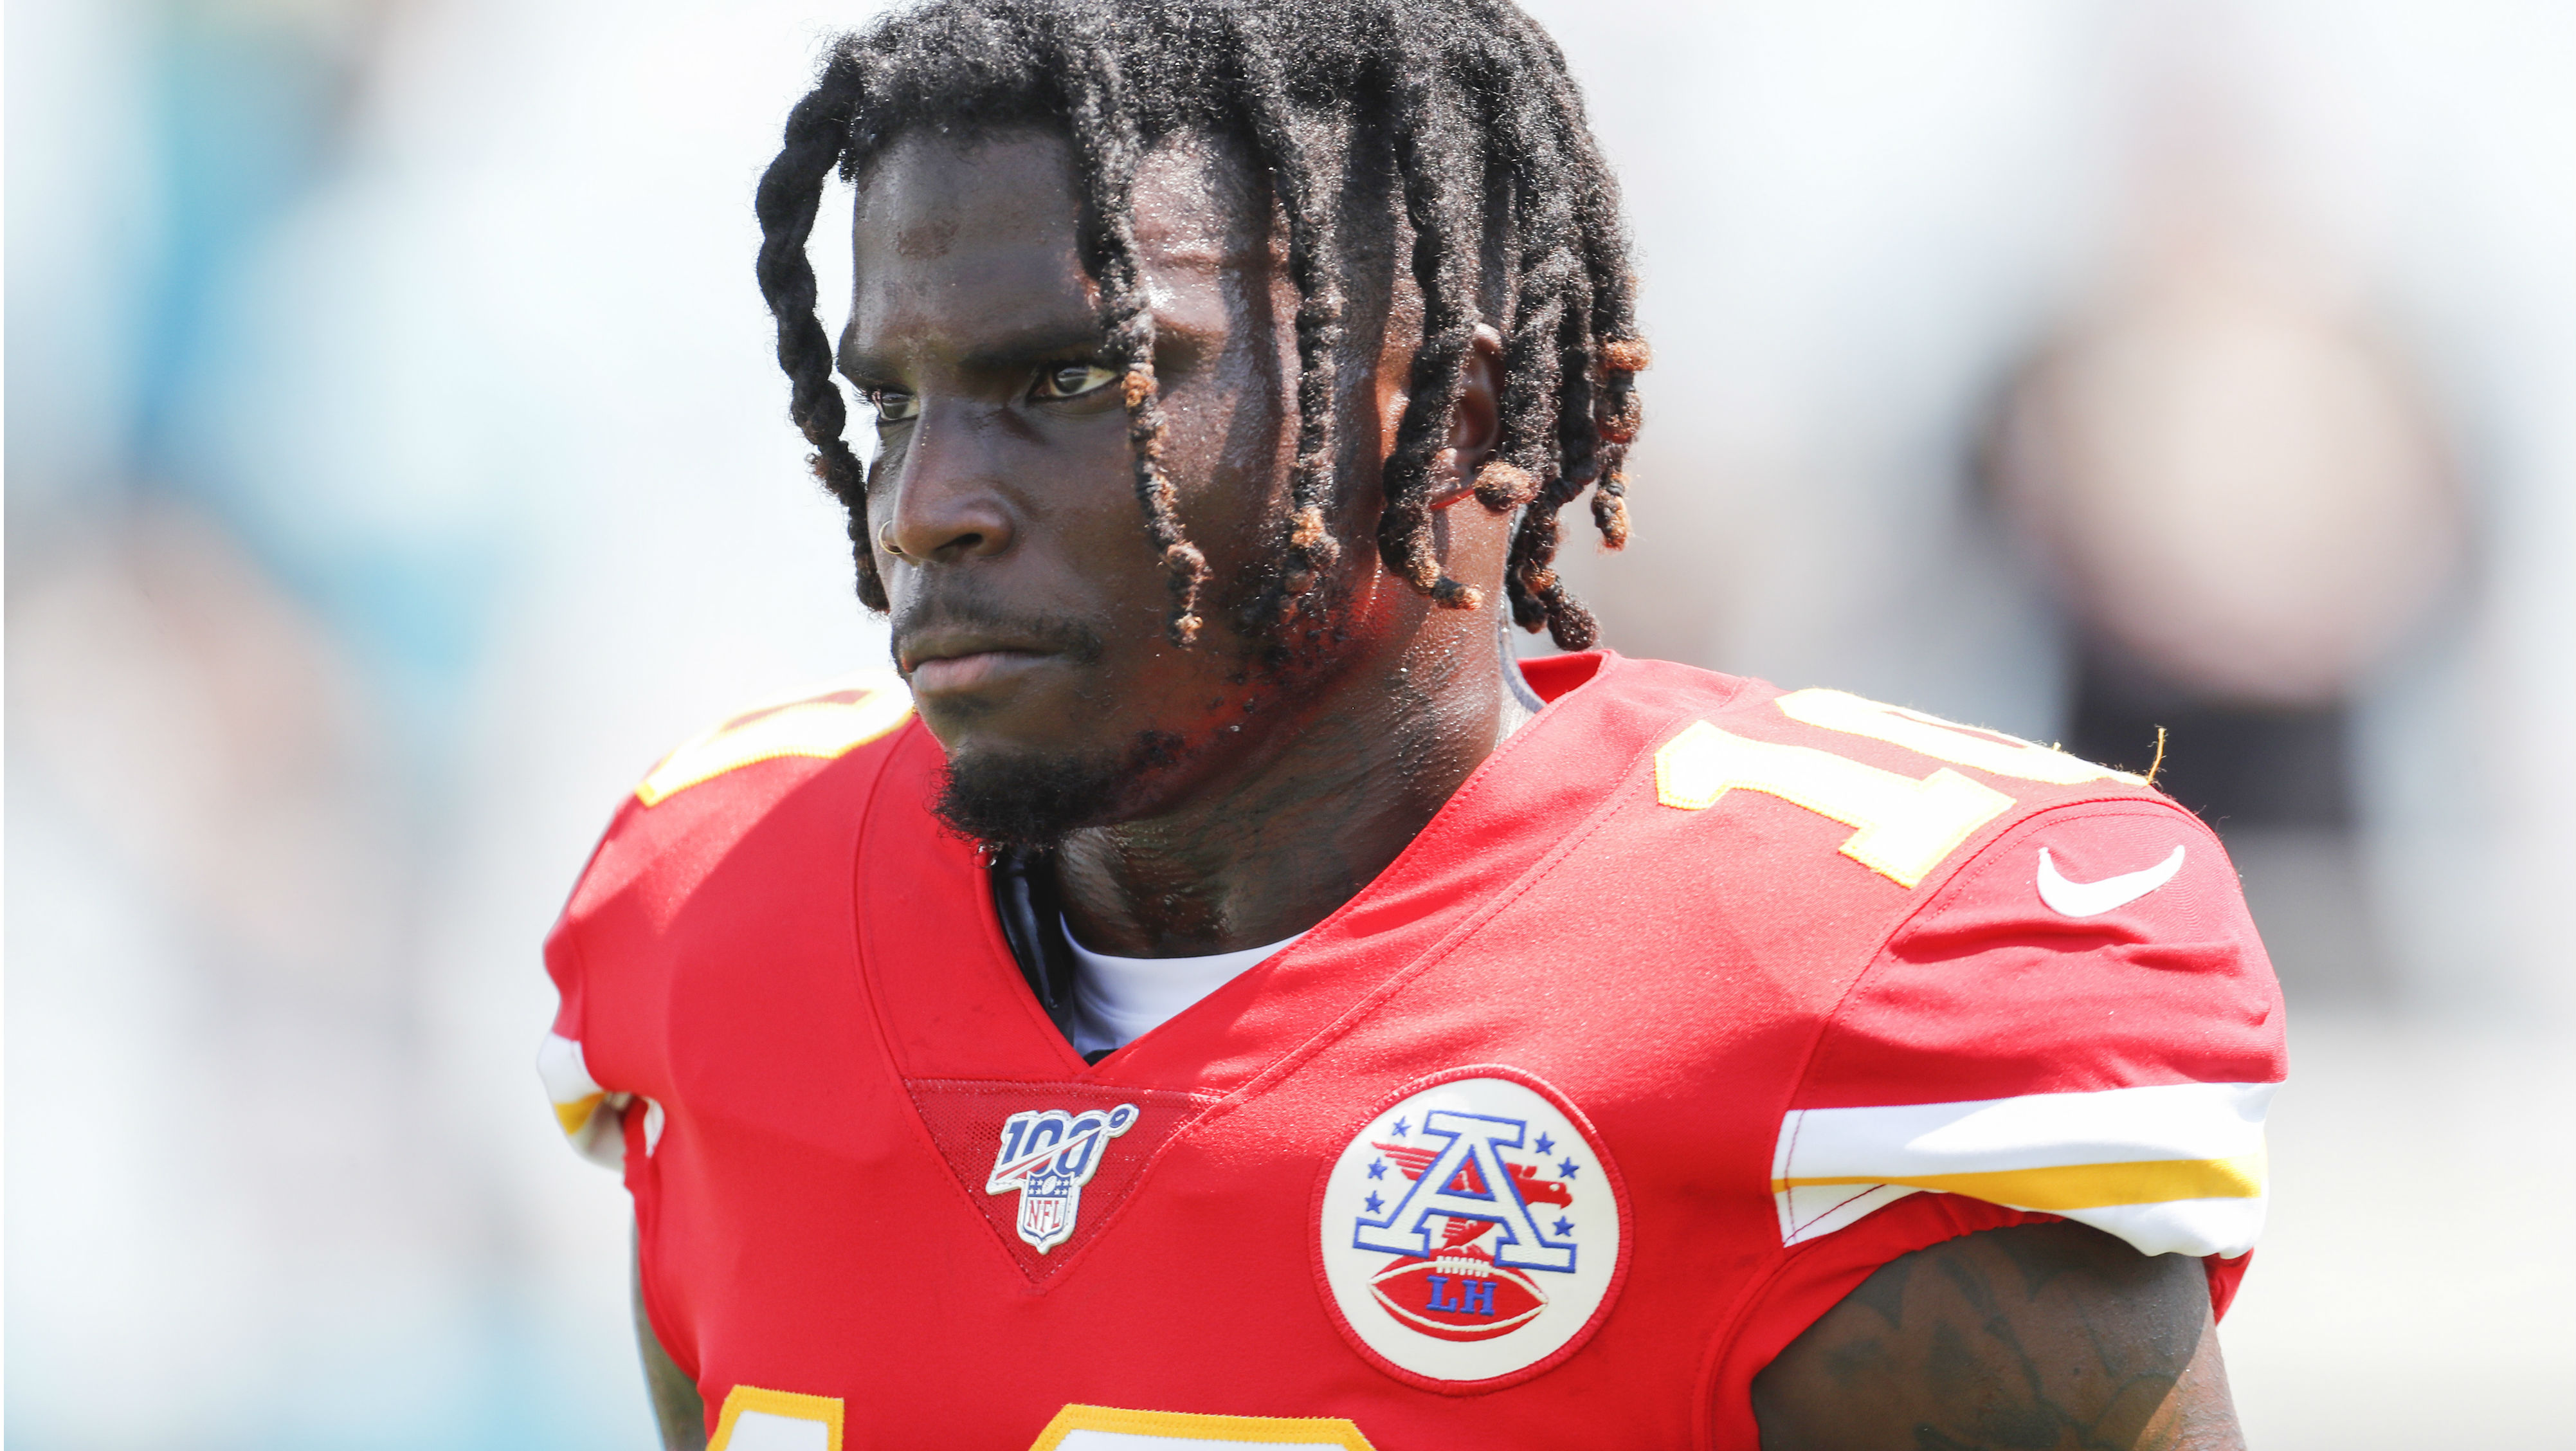 Tyreek Hill injury update: Chiefs receiver (shoulder) out 4-6 weeks, report says | Sporting News